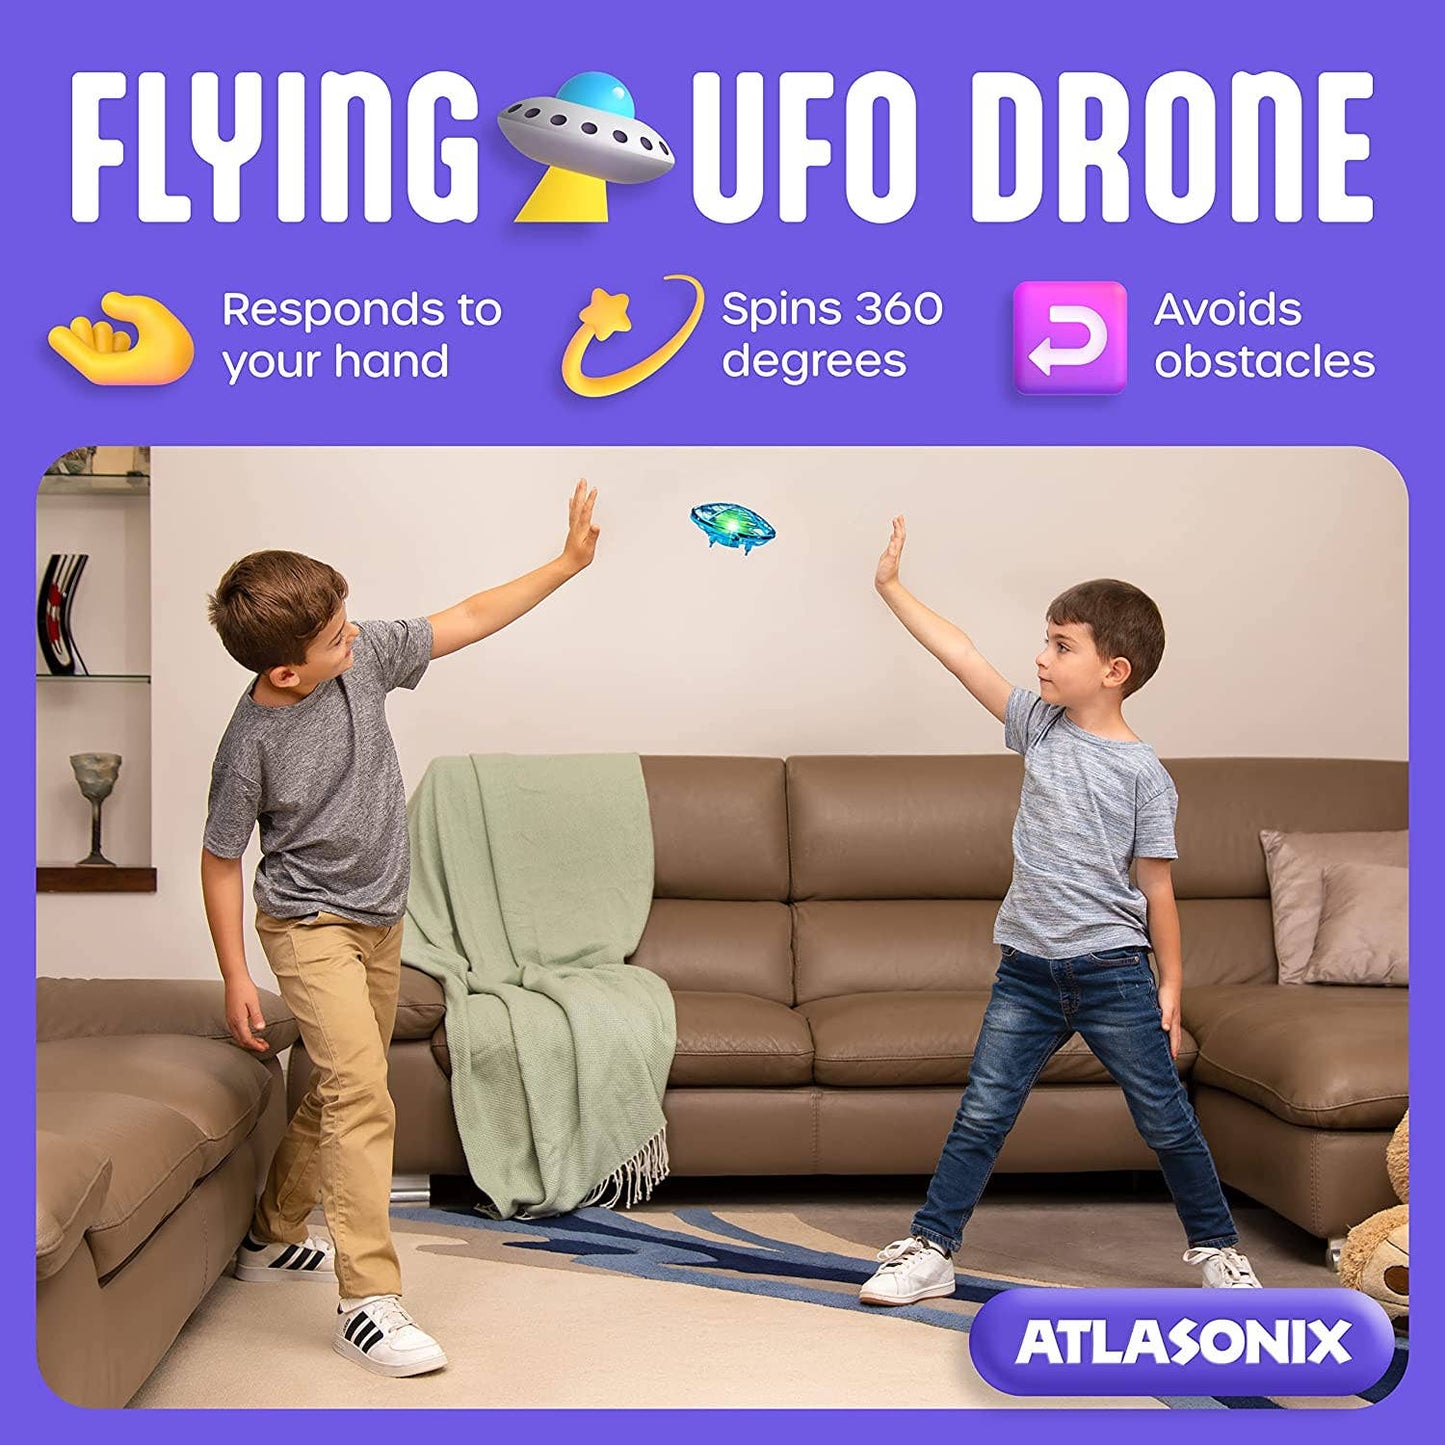 UFO Mini Hand Drone for Kids - Hand Controlled Flying Toy